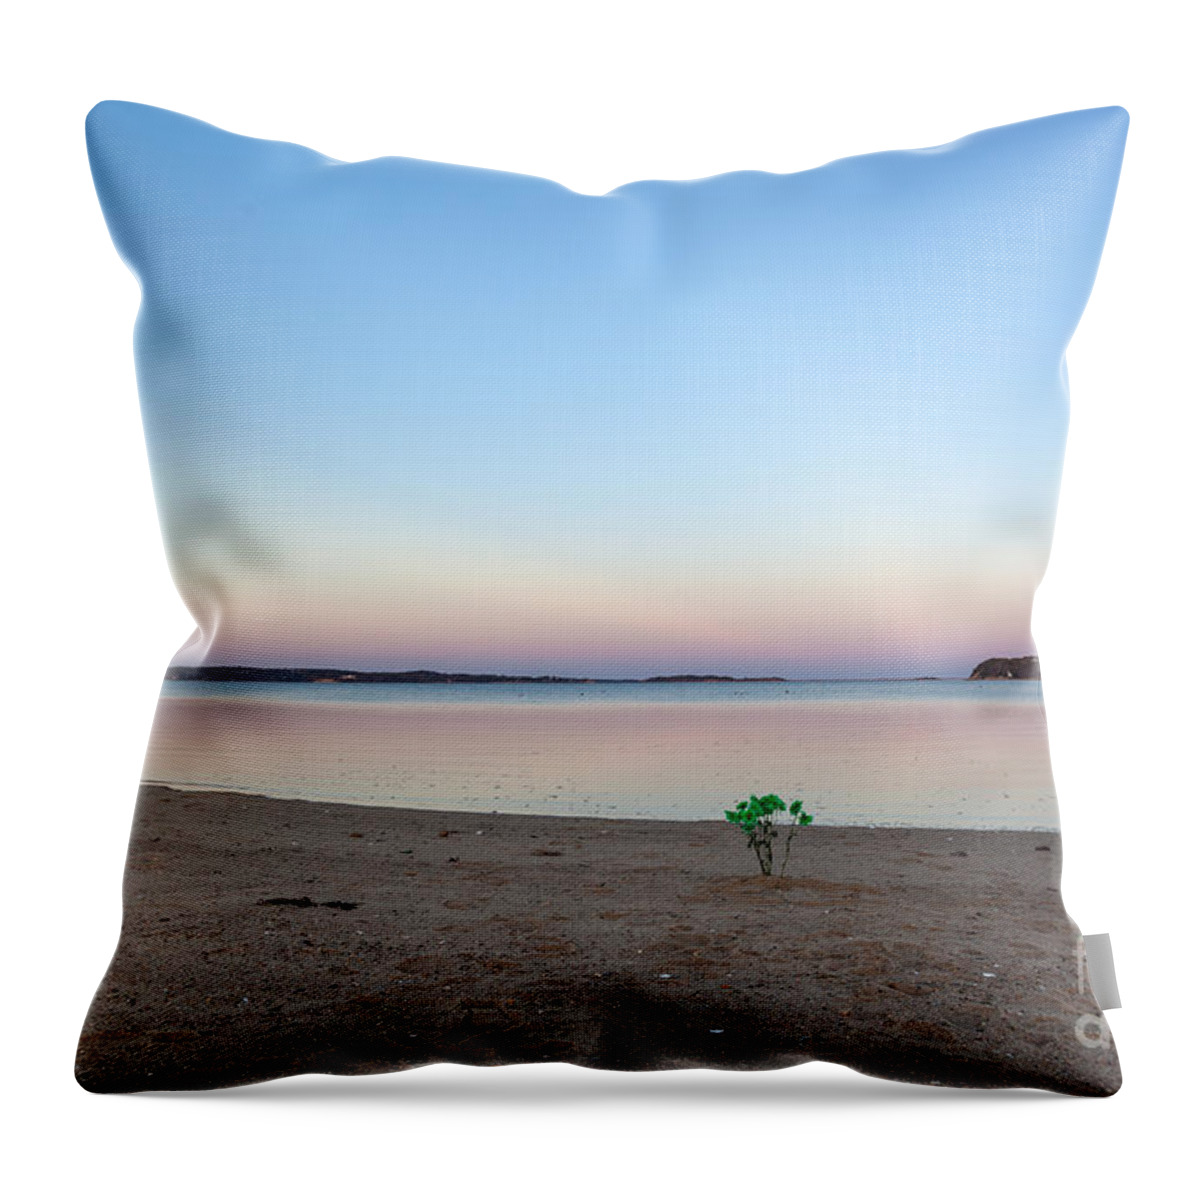 Treasured Memories Throw Pillow featuring the photograph Treasured Memories #1 by Michelle Constantine